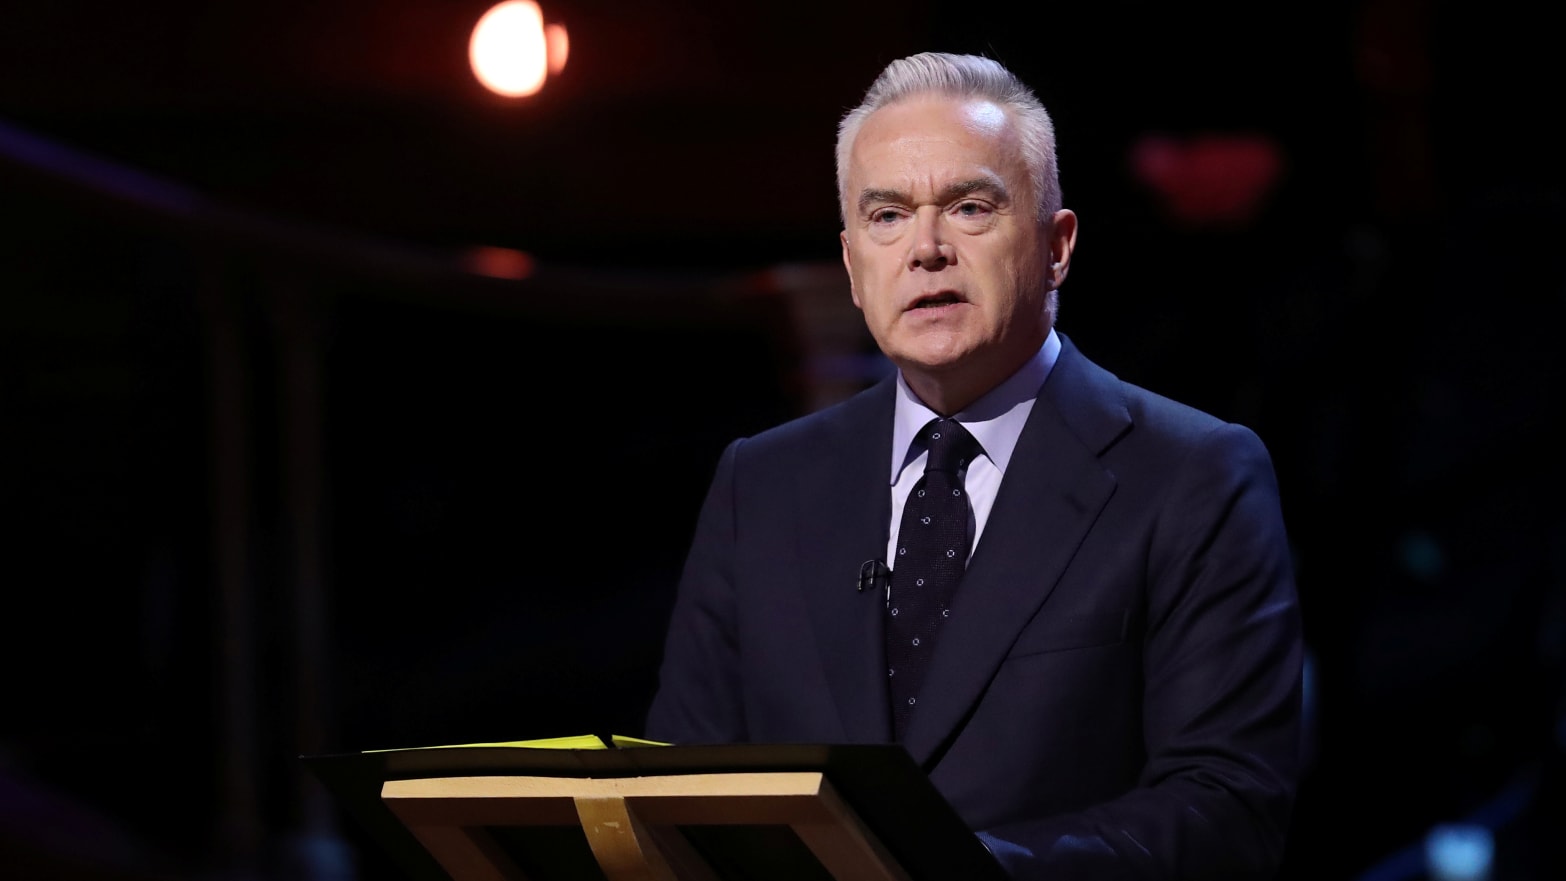 Huw Edwards Outed as BBC Star in Alleged Teen Sex Pic Scandal picture image